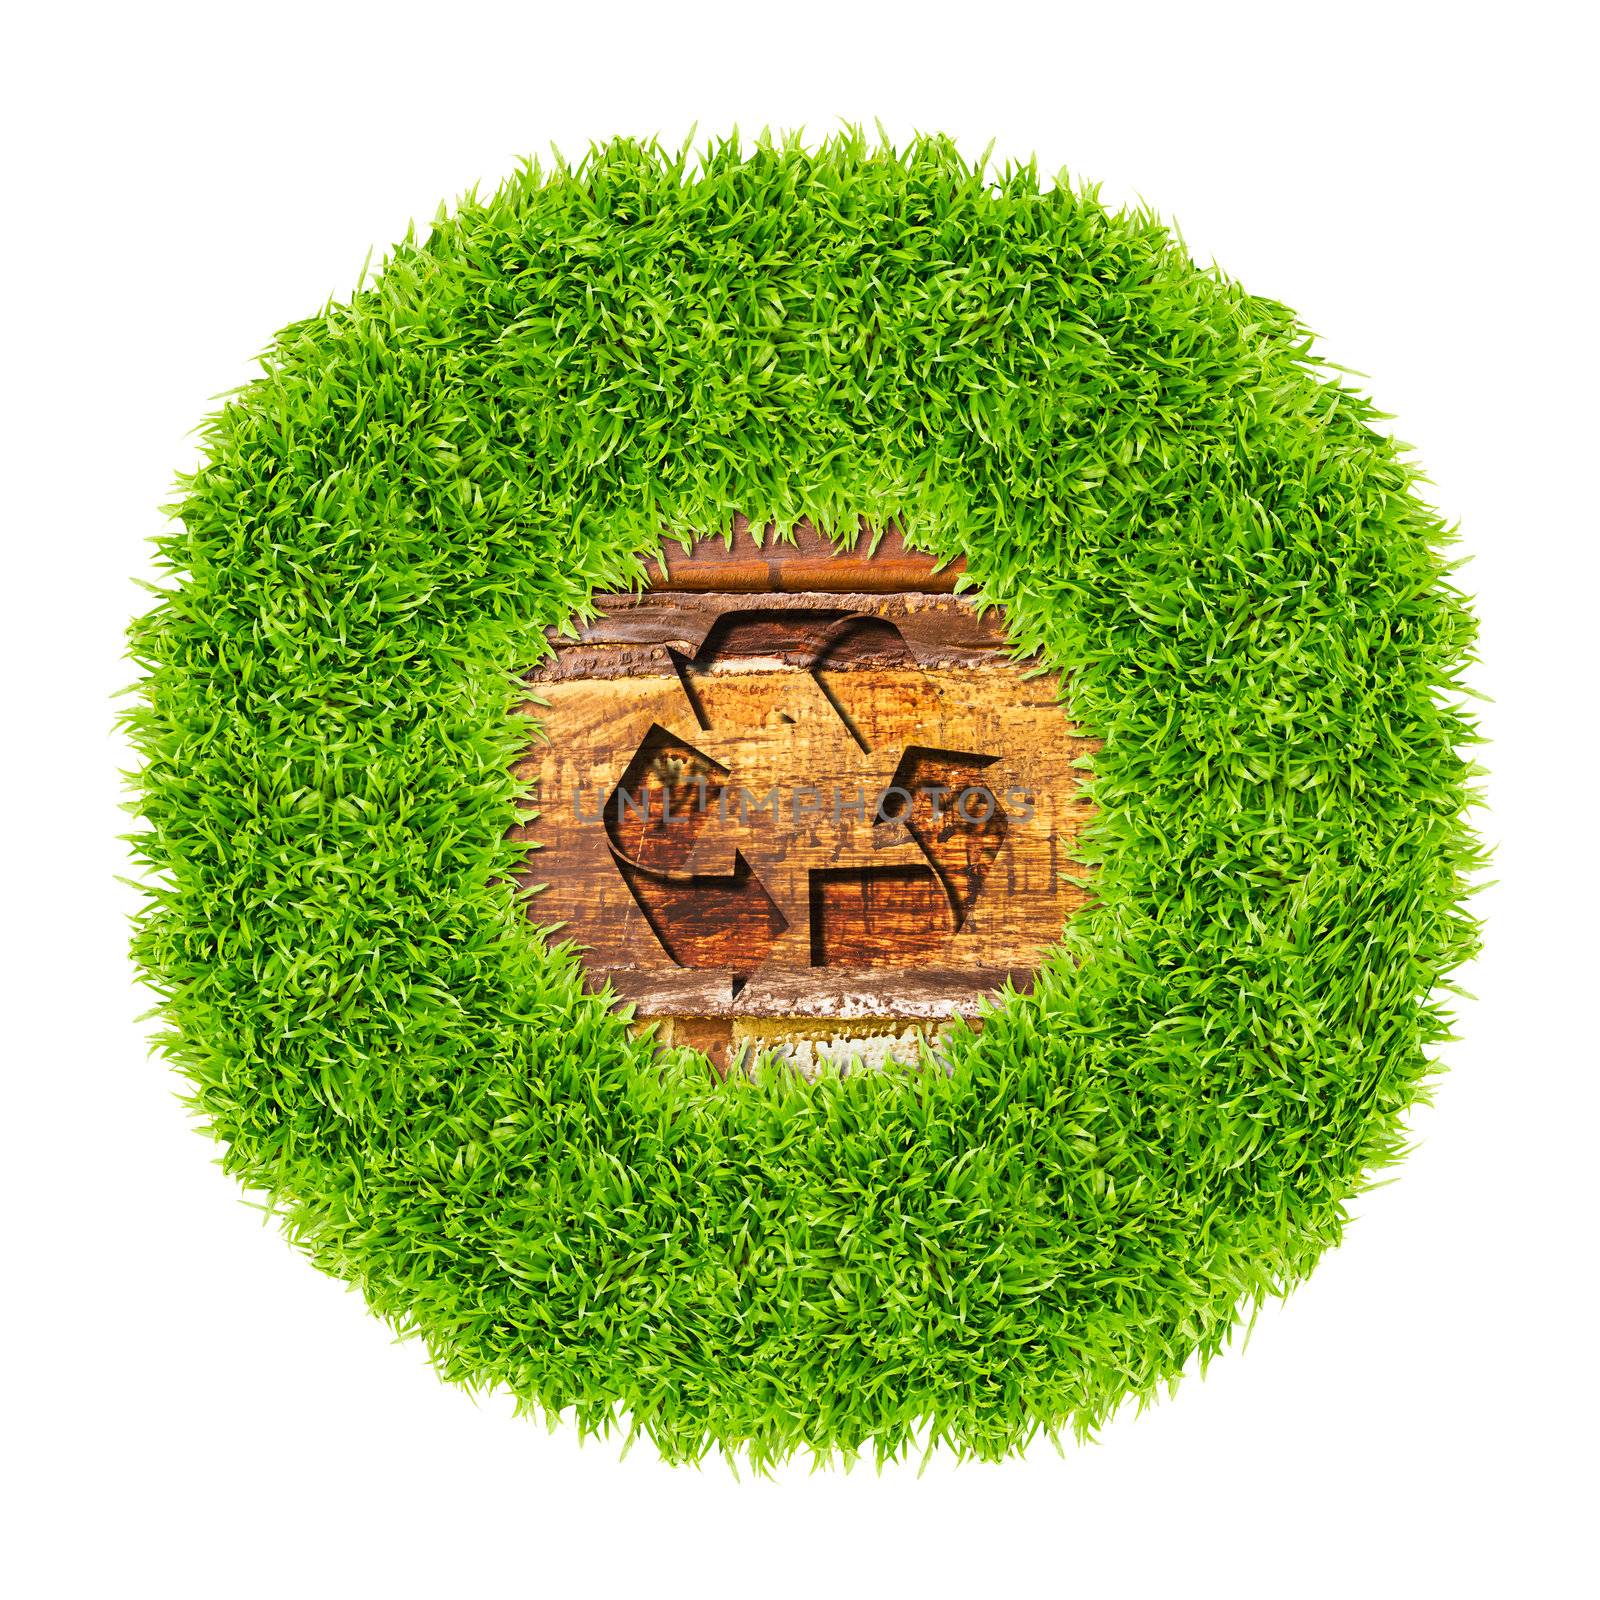 recycle sign and green grass on wood background by tungphoto